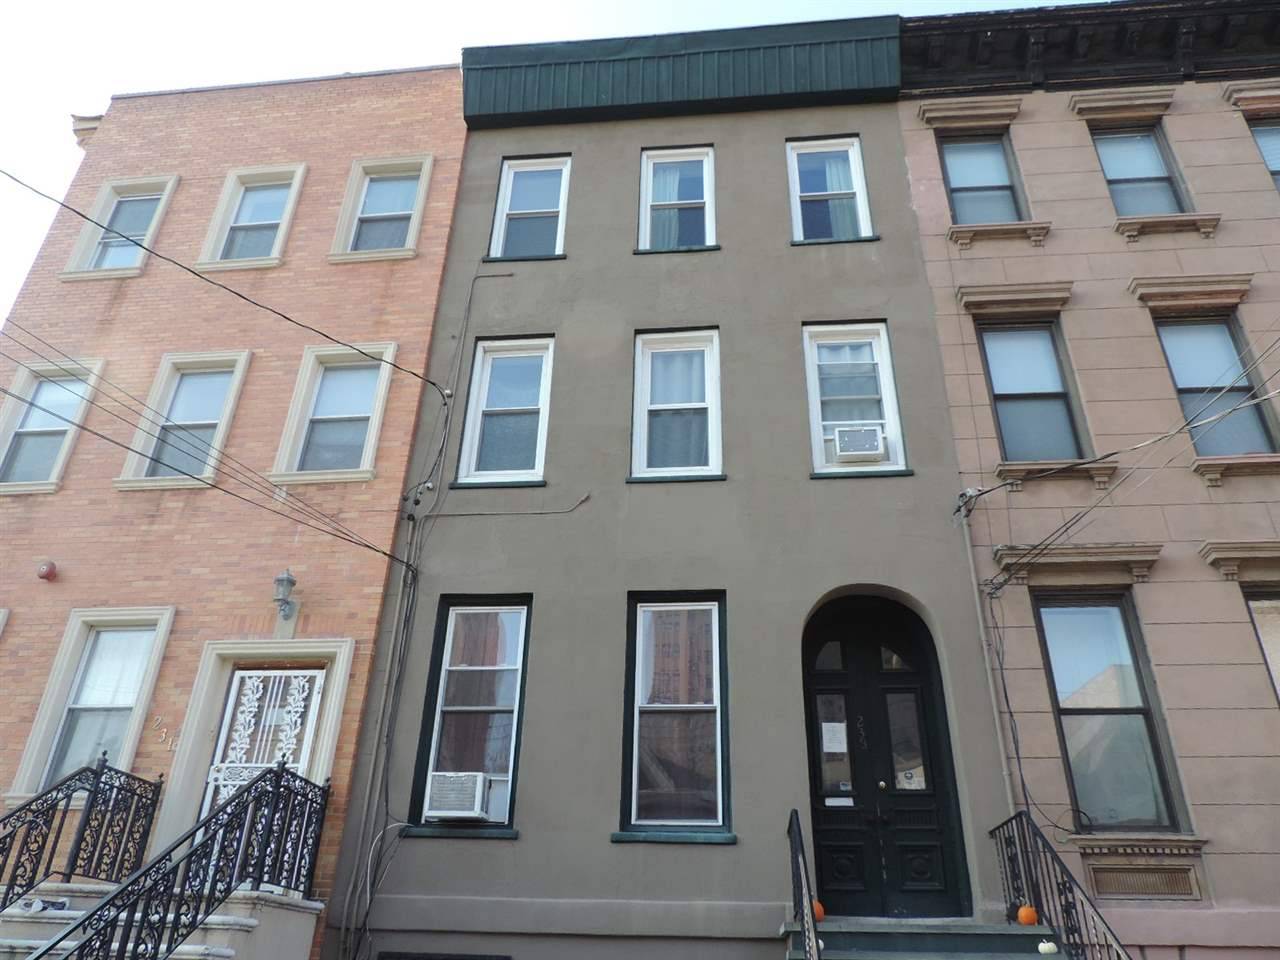 Wonderful brownstone in McGinley Square - 3 BR New Jersey